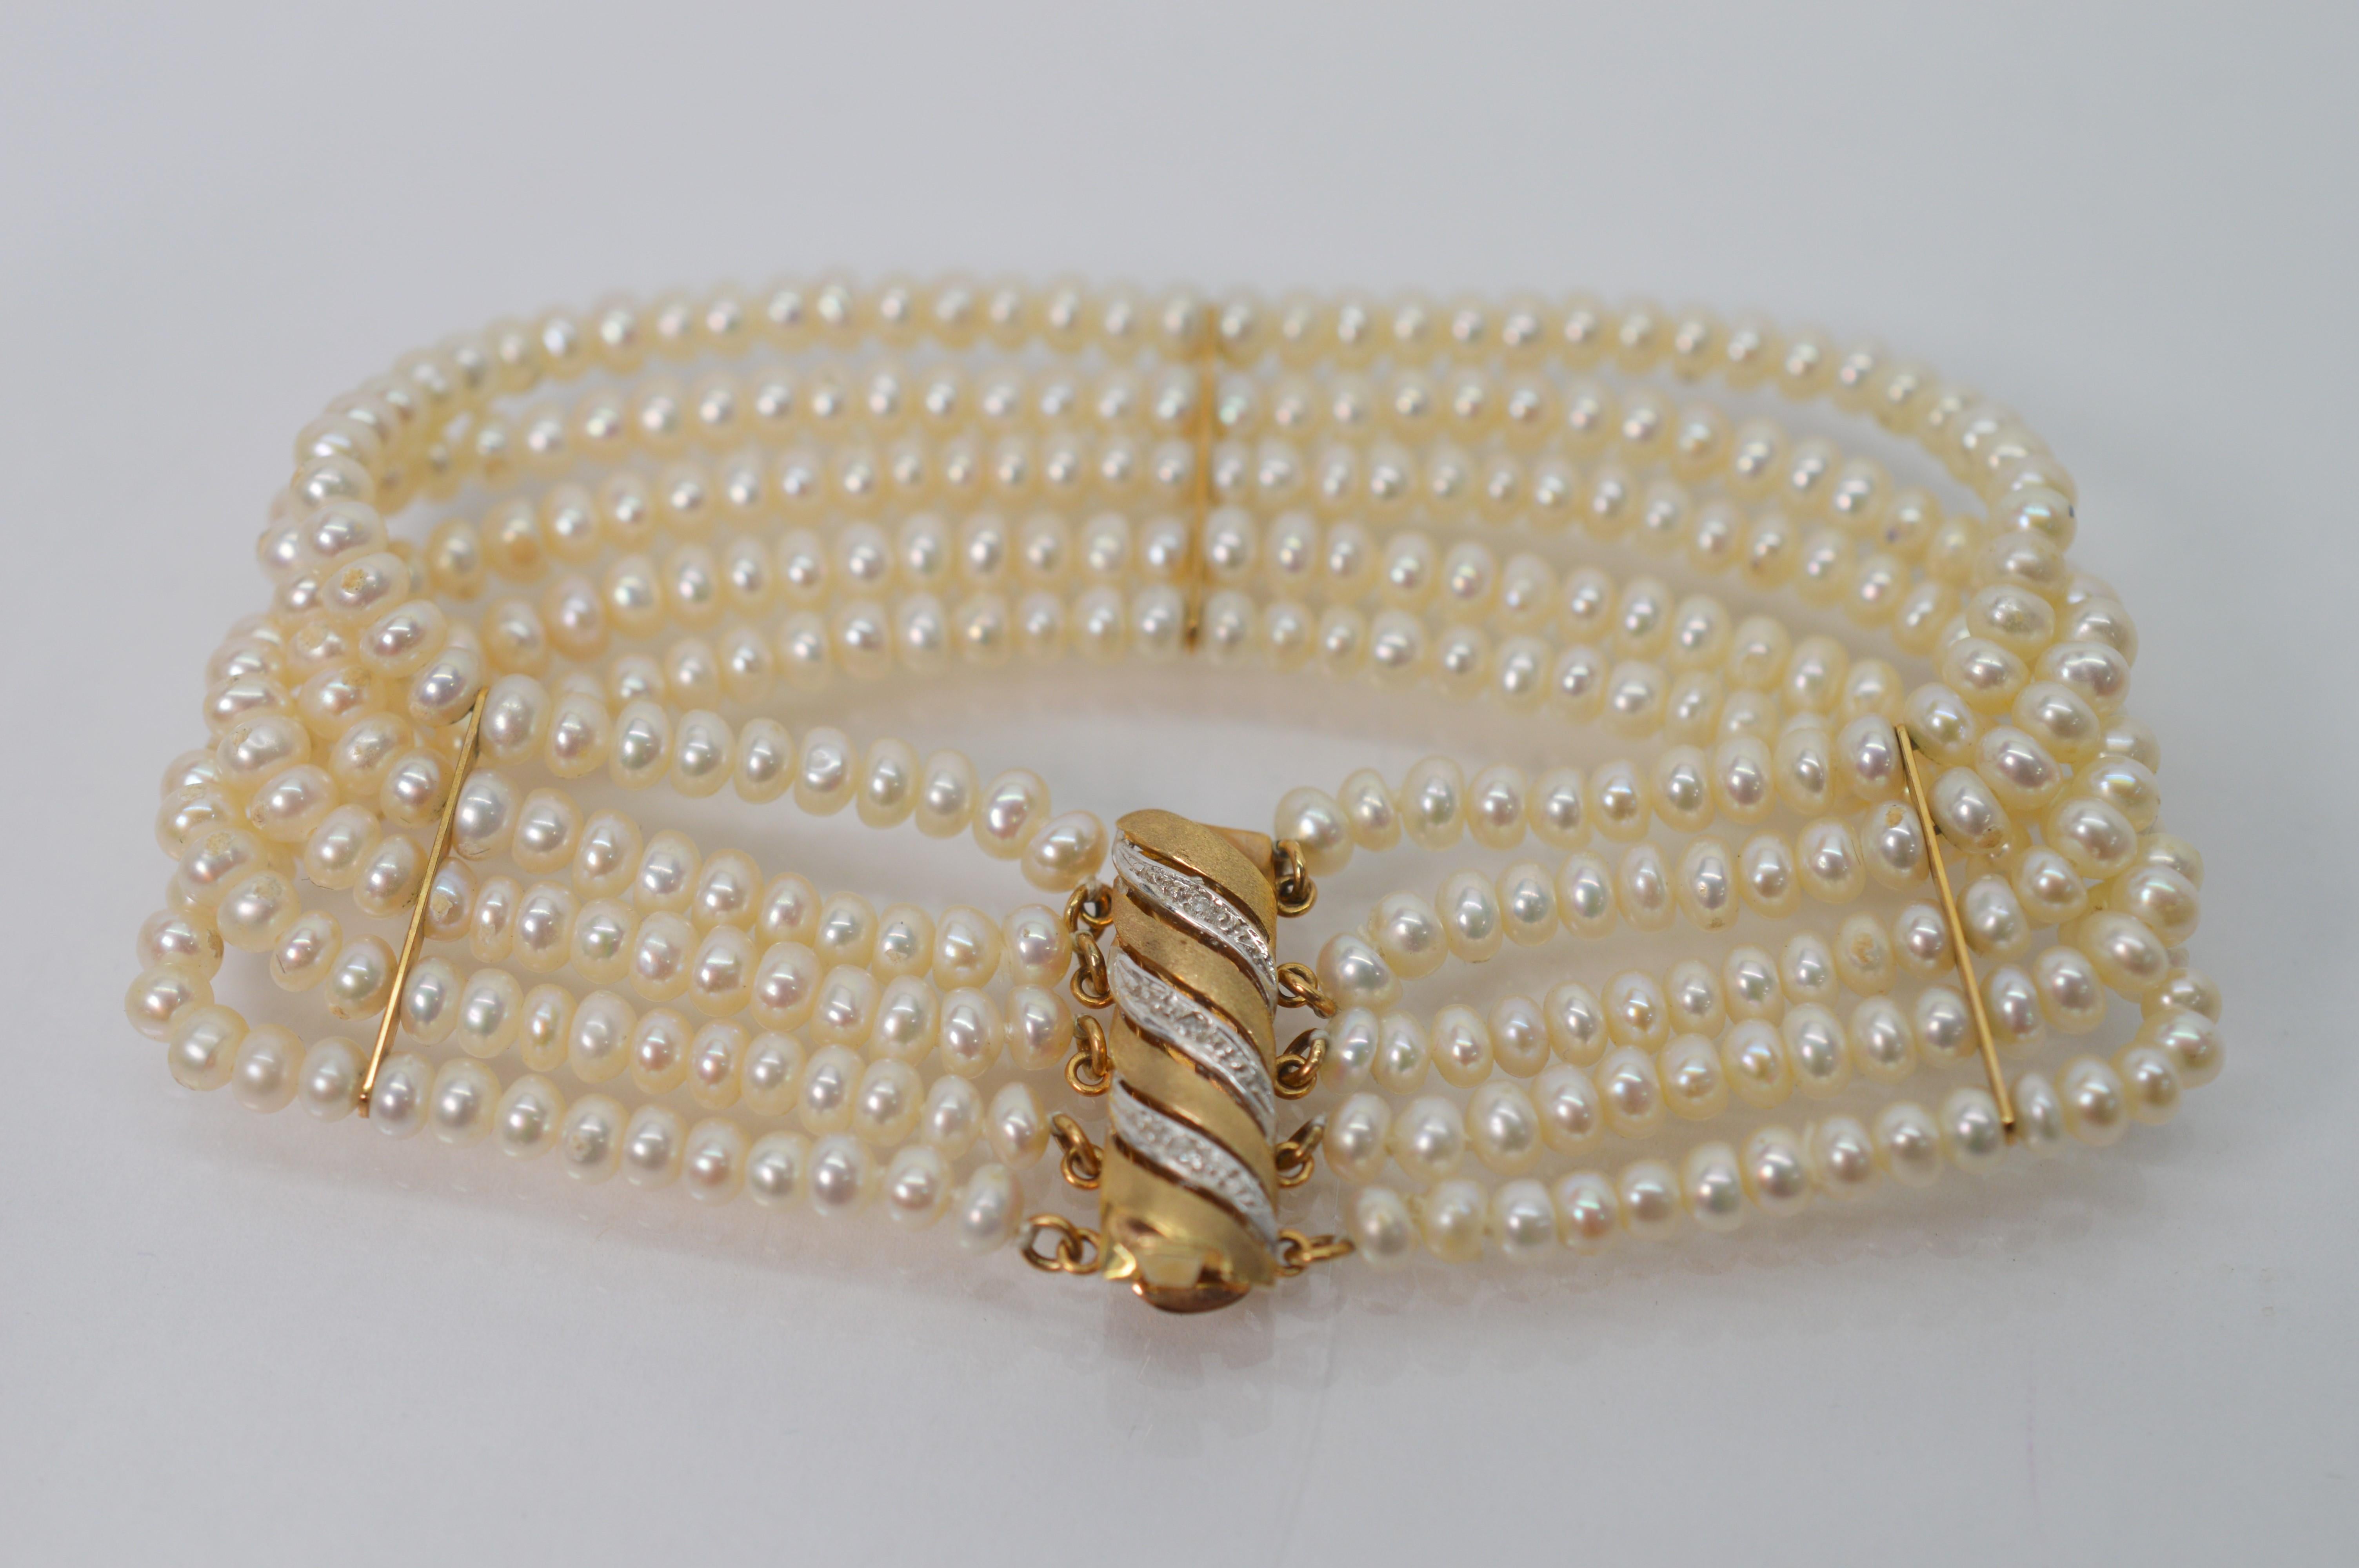 Finished with a beautiful and stylish stylish fourteen carat (14K) satin yellow gold charm clasp enhanced with swirls of diamonds, this multi-strand bracelet of lustrous 3.5mm button Akoya pearls is an elegant piece for any dress occasion. With five